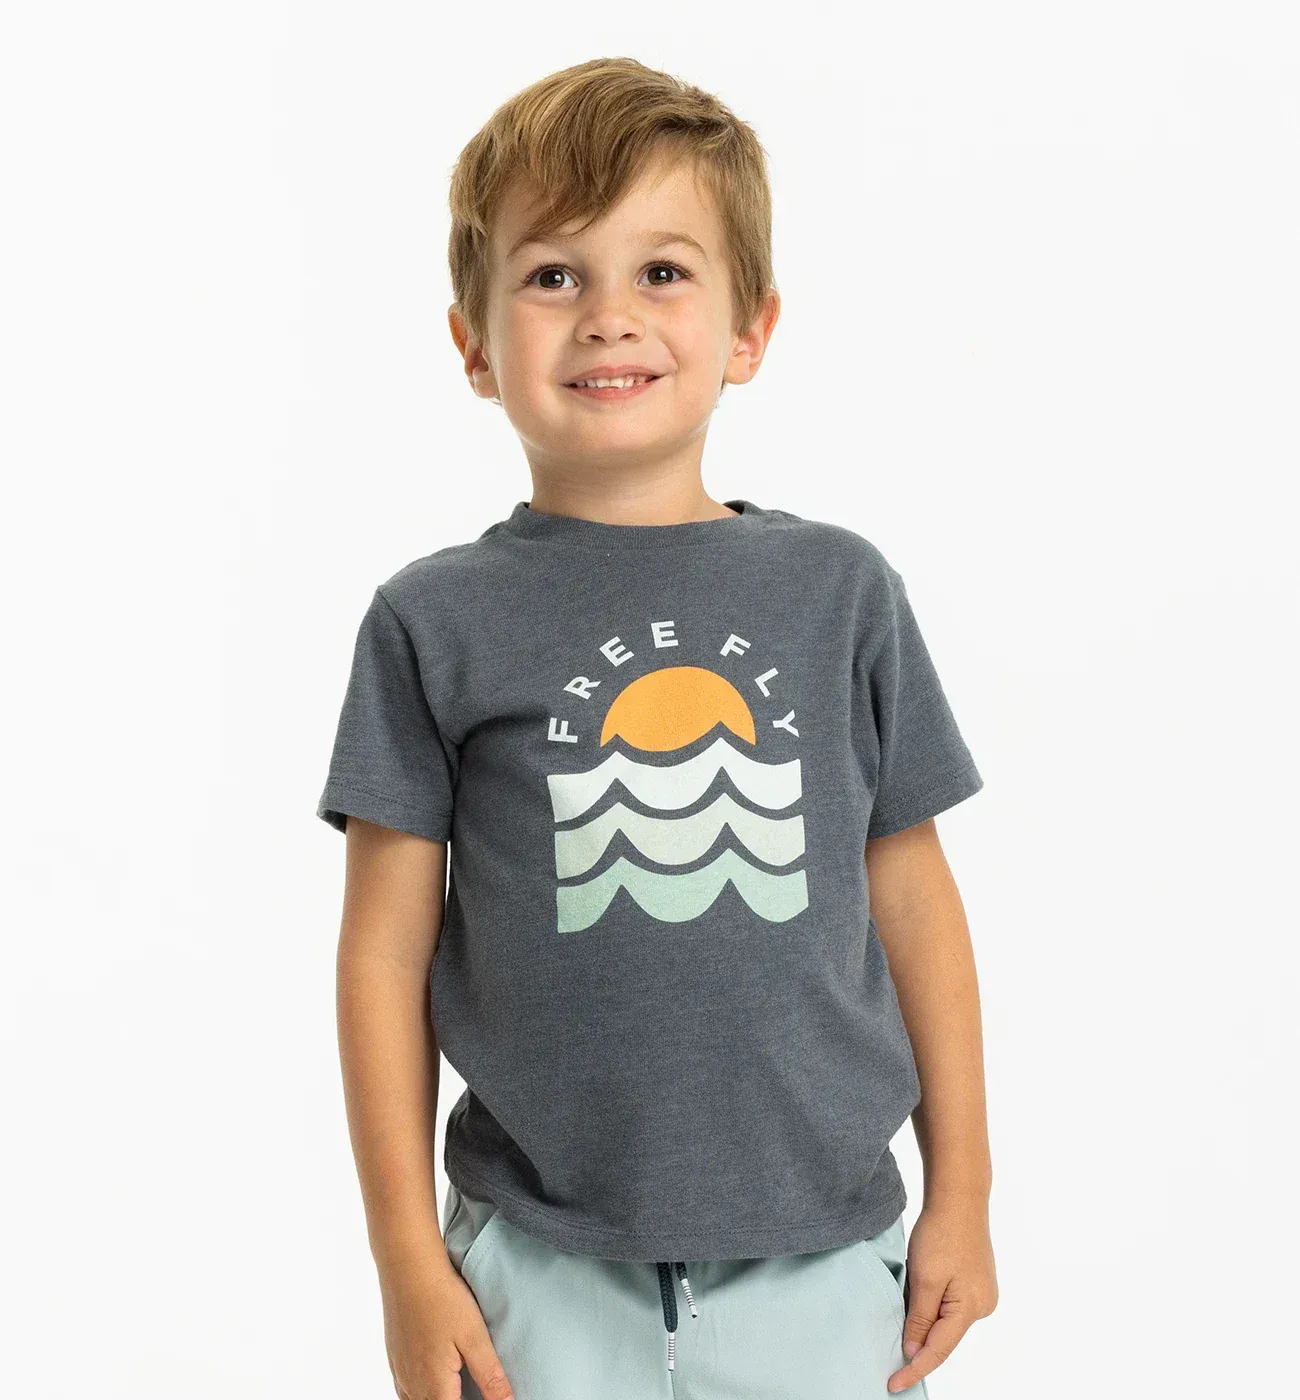 Boys Perfect Day Tee - Heather Storm Cloud, Size: 2T